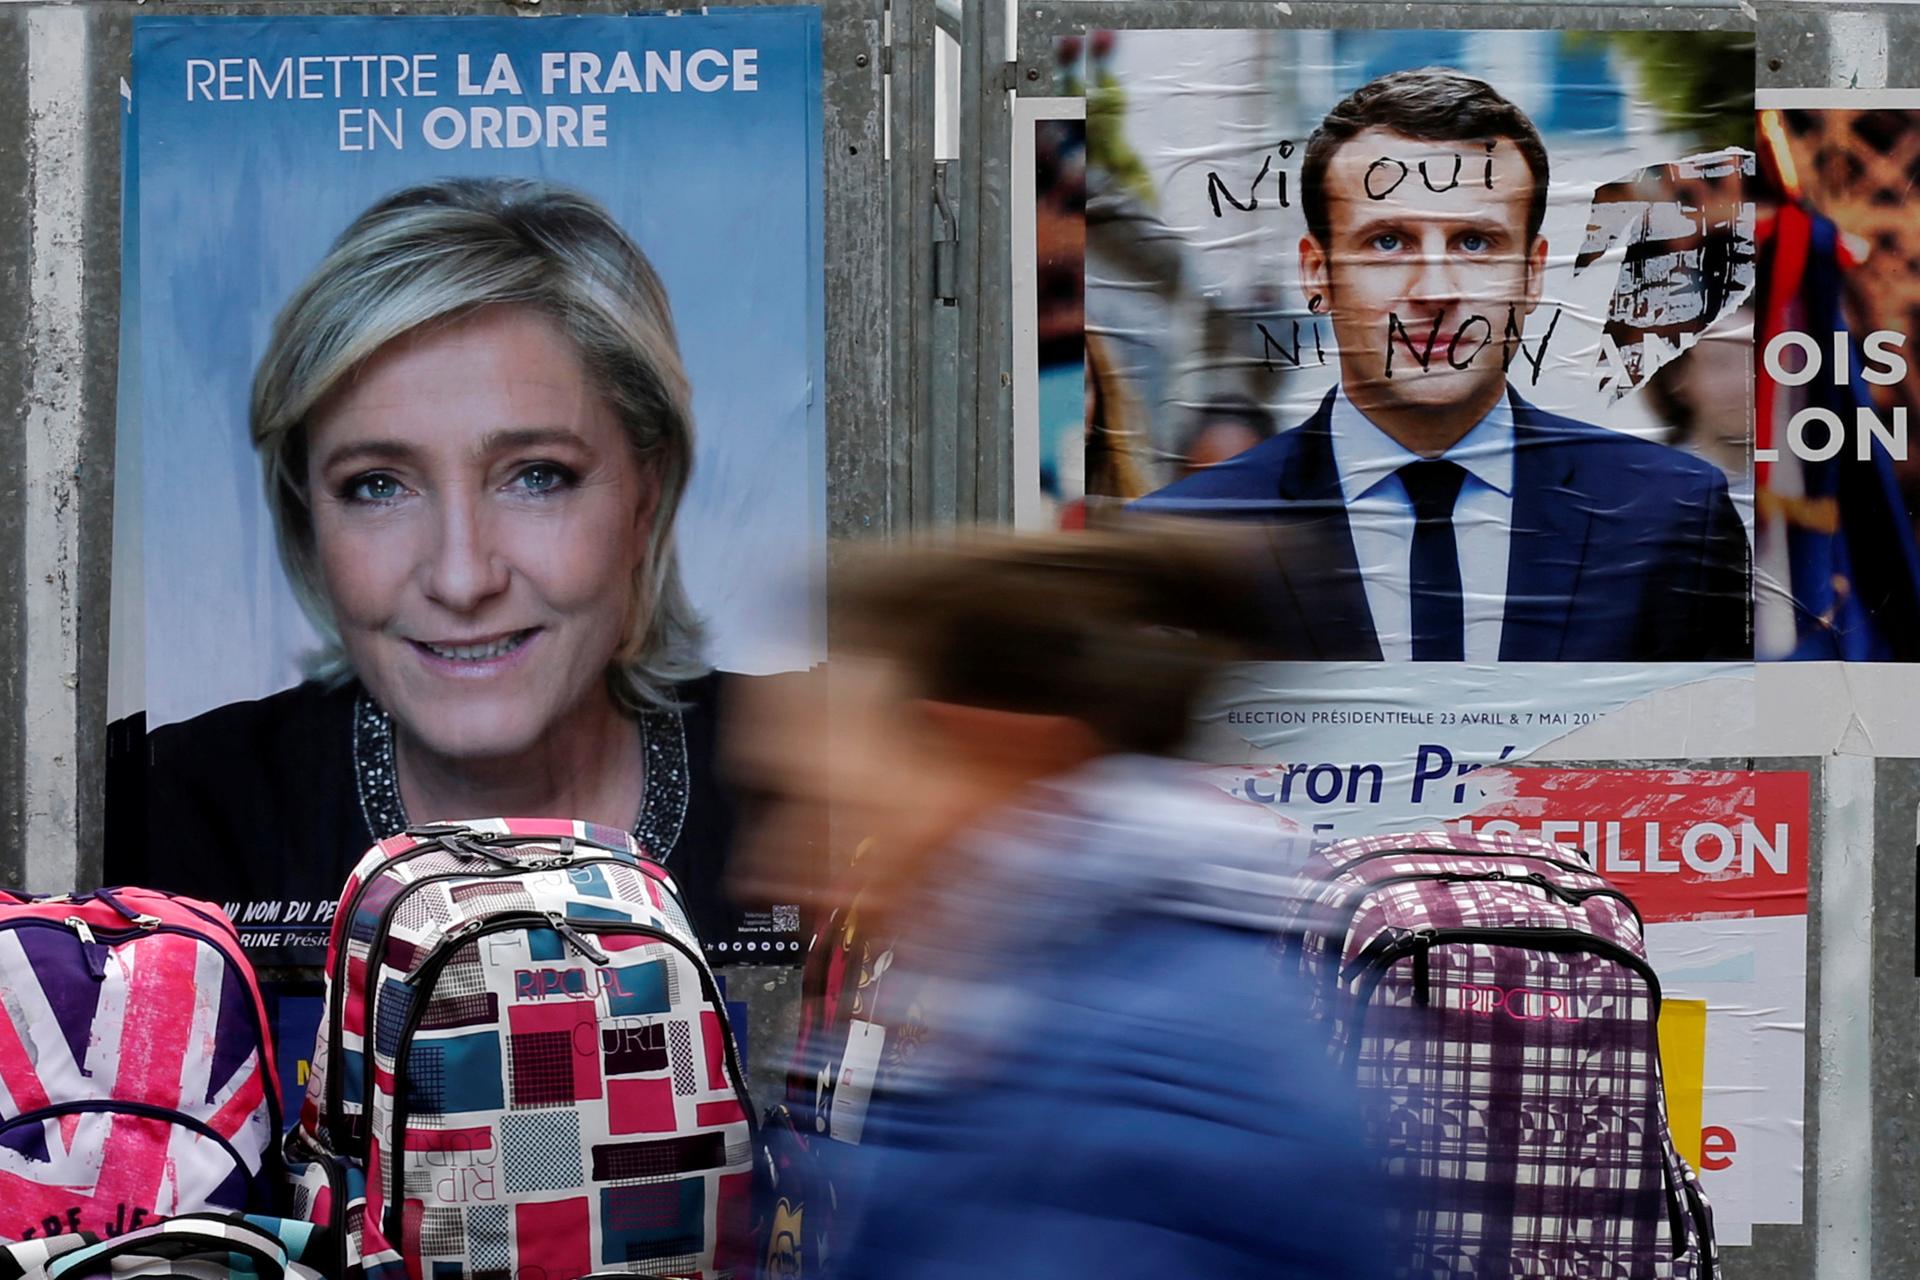 A woman walks past official posters of candidates for the 2017 French presidential election Marine Le Pen and Emmanuel Macron